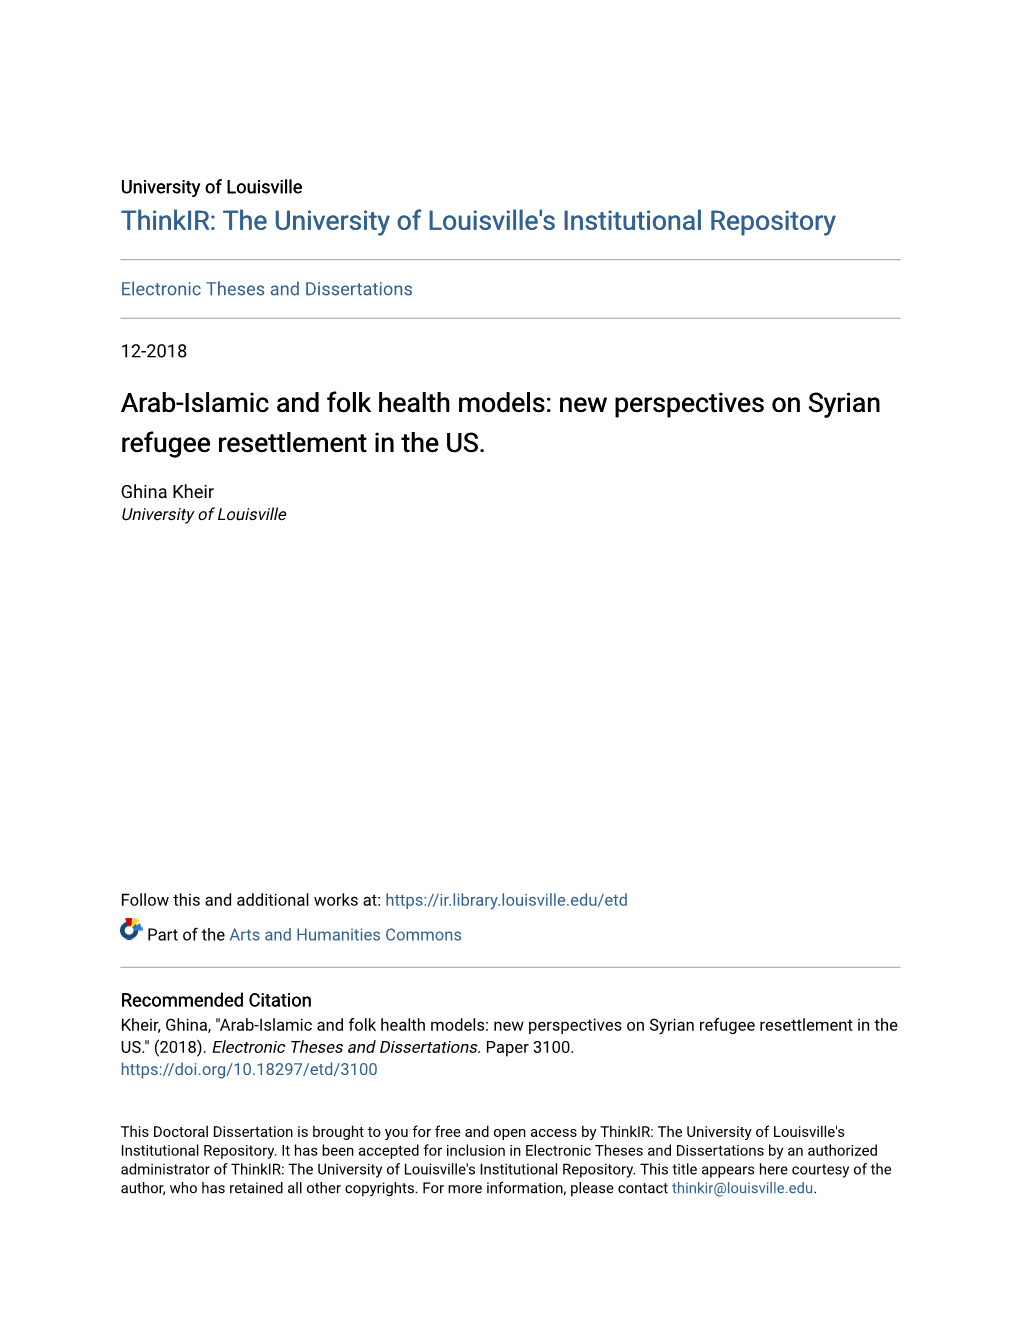 Arab-Islamic and Folk Health Models: New Perspectives on Syrian Refugee Resettlement in the US